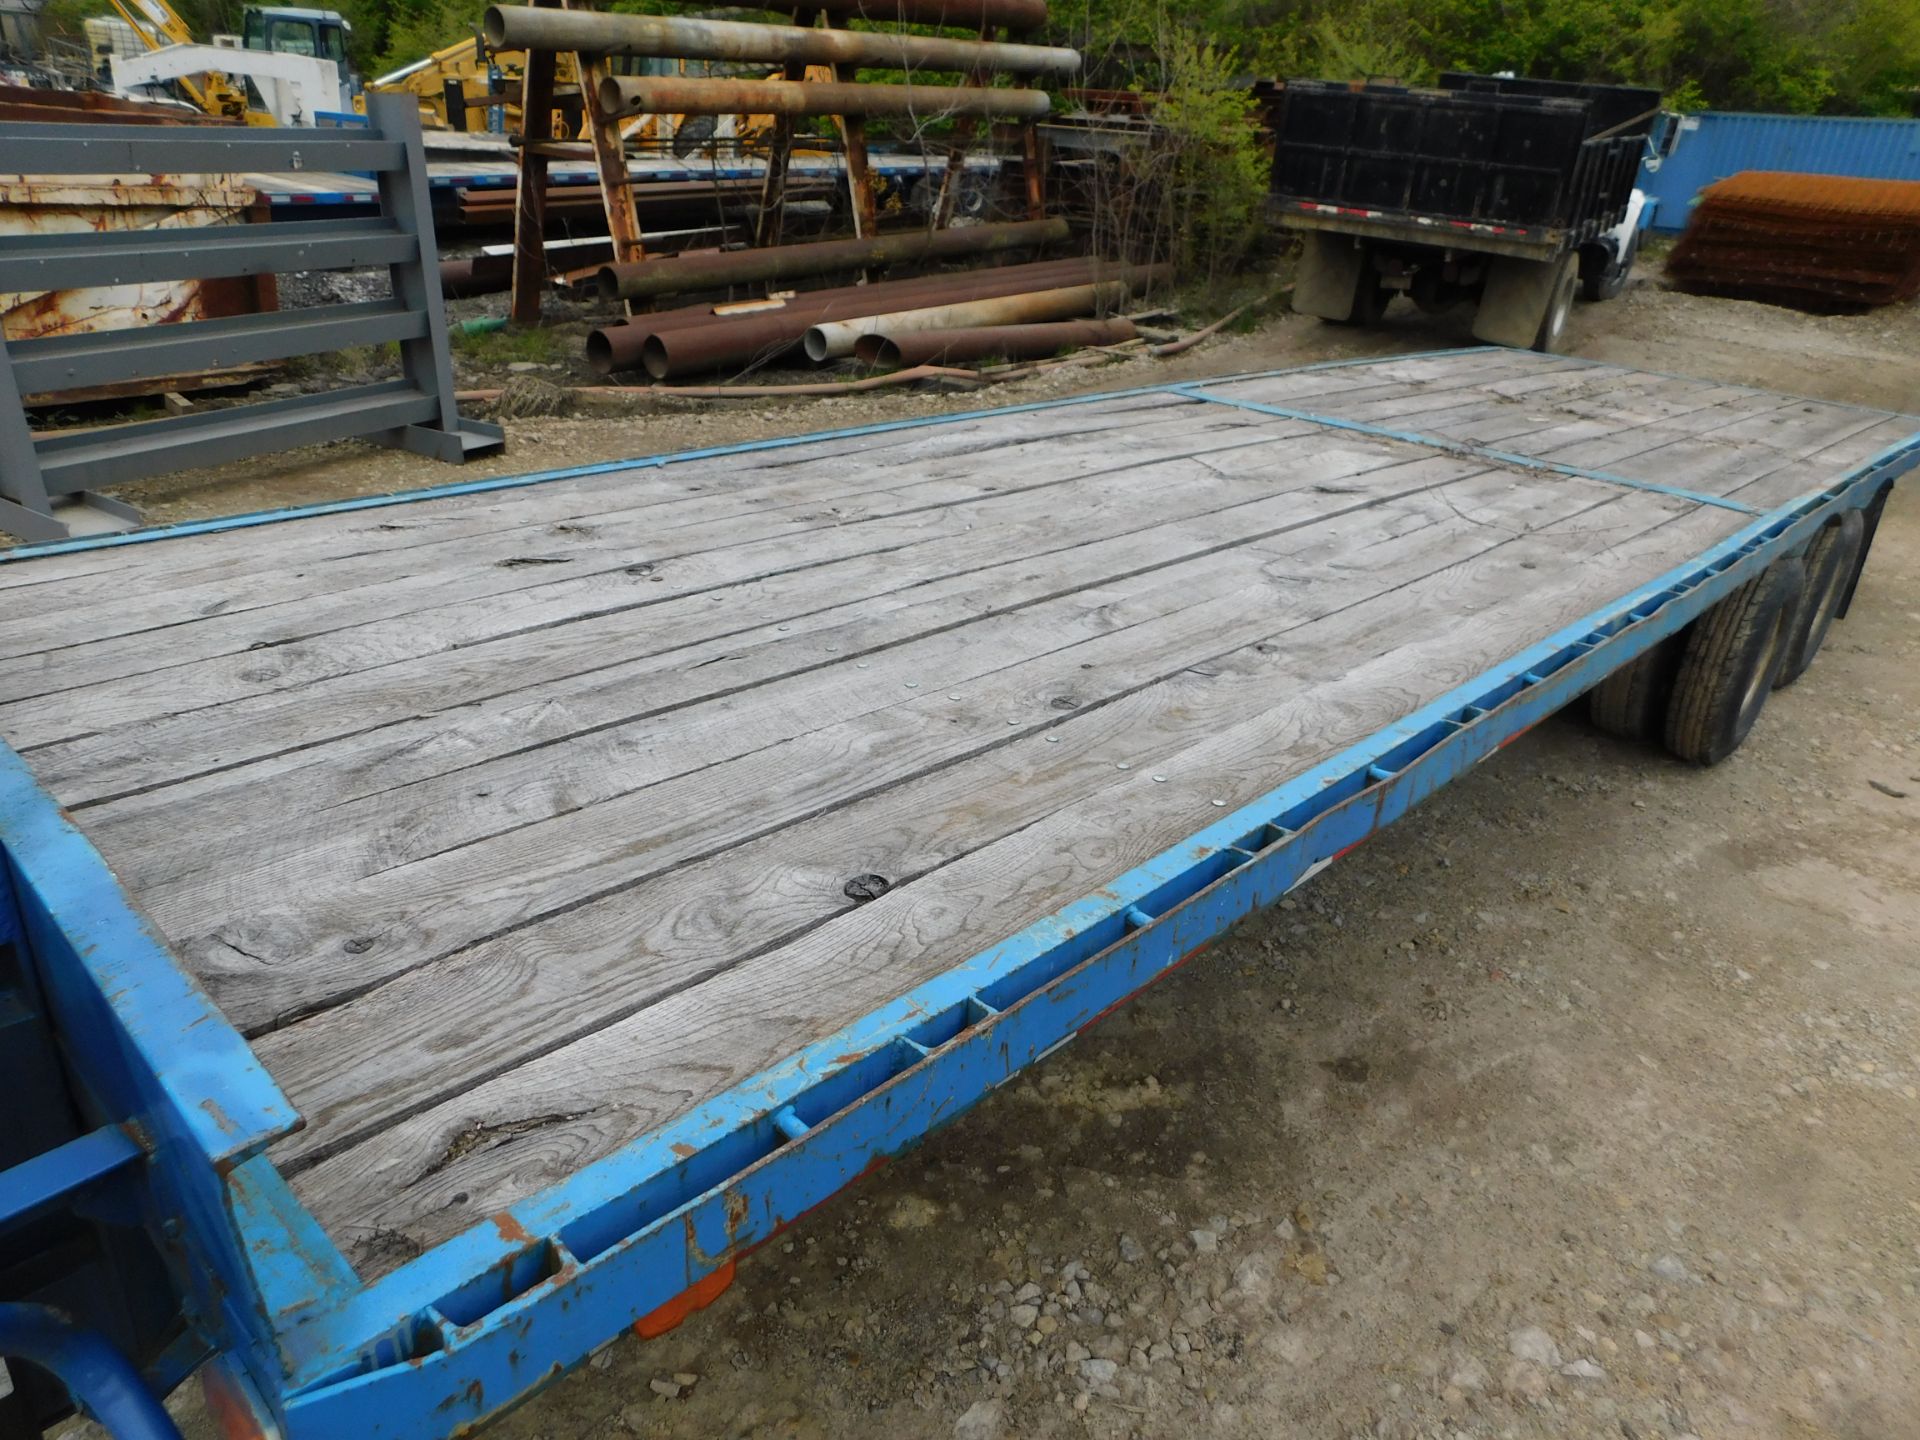 Gooseneck Trailer, Tandem Axle with Duals, 8' Wide x 26' Long, Wood Deck - Image 2 of 17